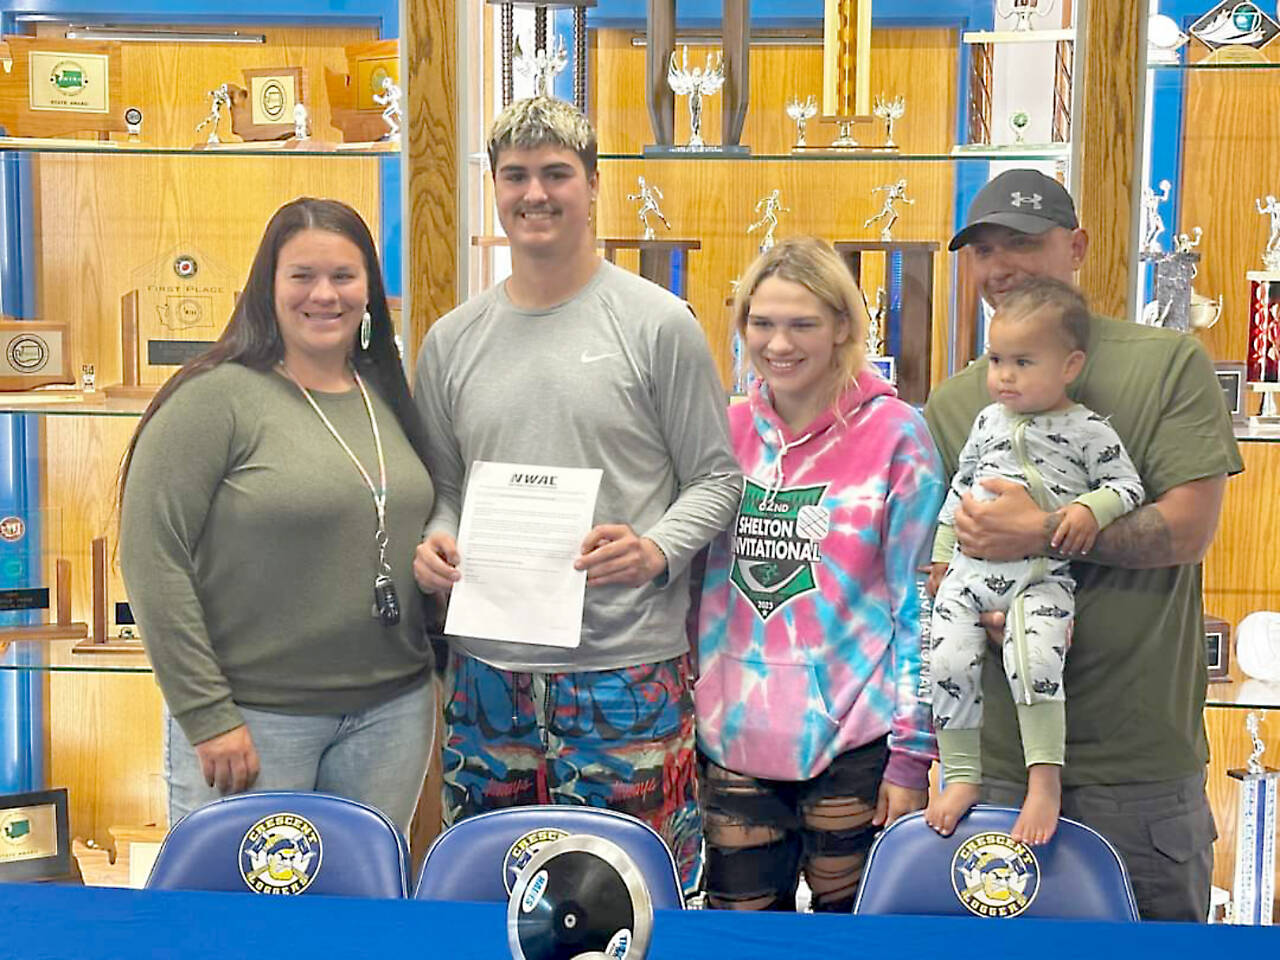 From left, mother Alicia Ferro-May, Conner Ferro-May, sister Chloe Ferro-May and stepfather Rich Albaugh celebrate Crescent senior Conner Ferro-May signing a letter of intent to participate in track and field at Mount Hood Community College in Gresham, Ore. (Crescent High School)